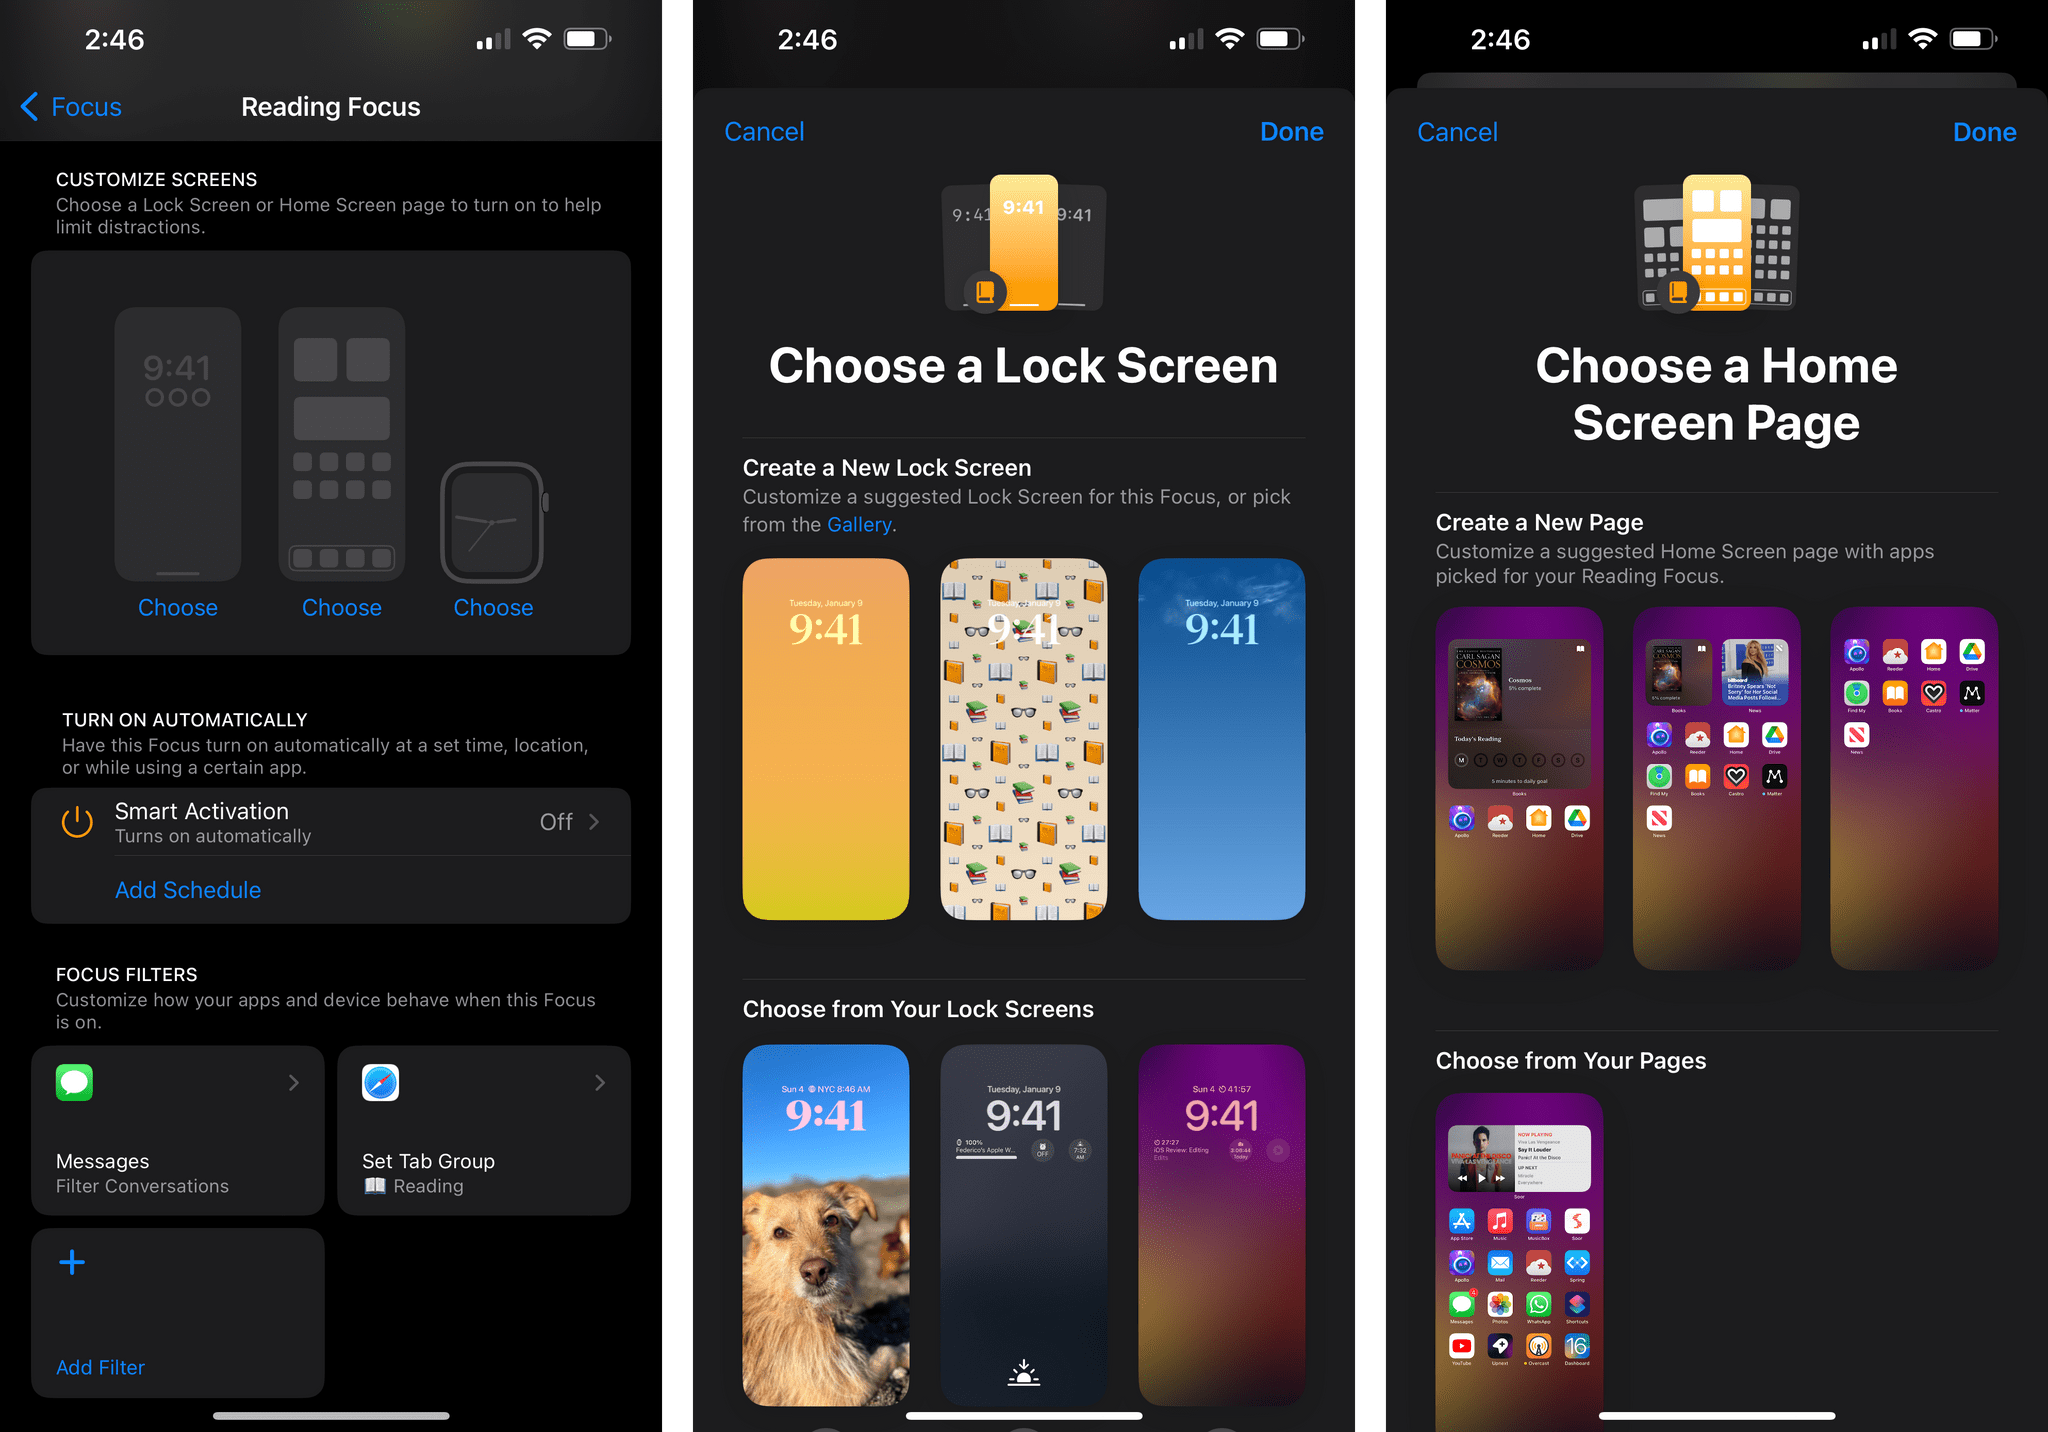 Suggested Lock and Home Screen pages for a Reading Focus. Pay attention to the suggested emoji for the wallpaper and apps on the Home Screen.